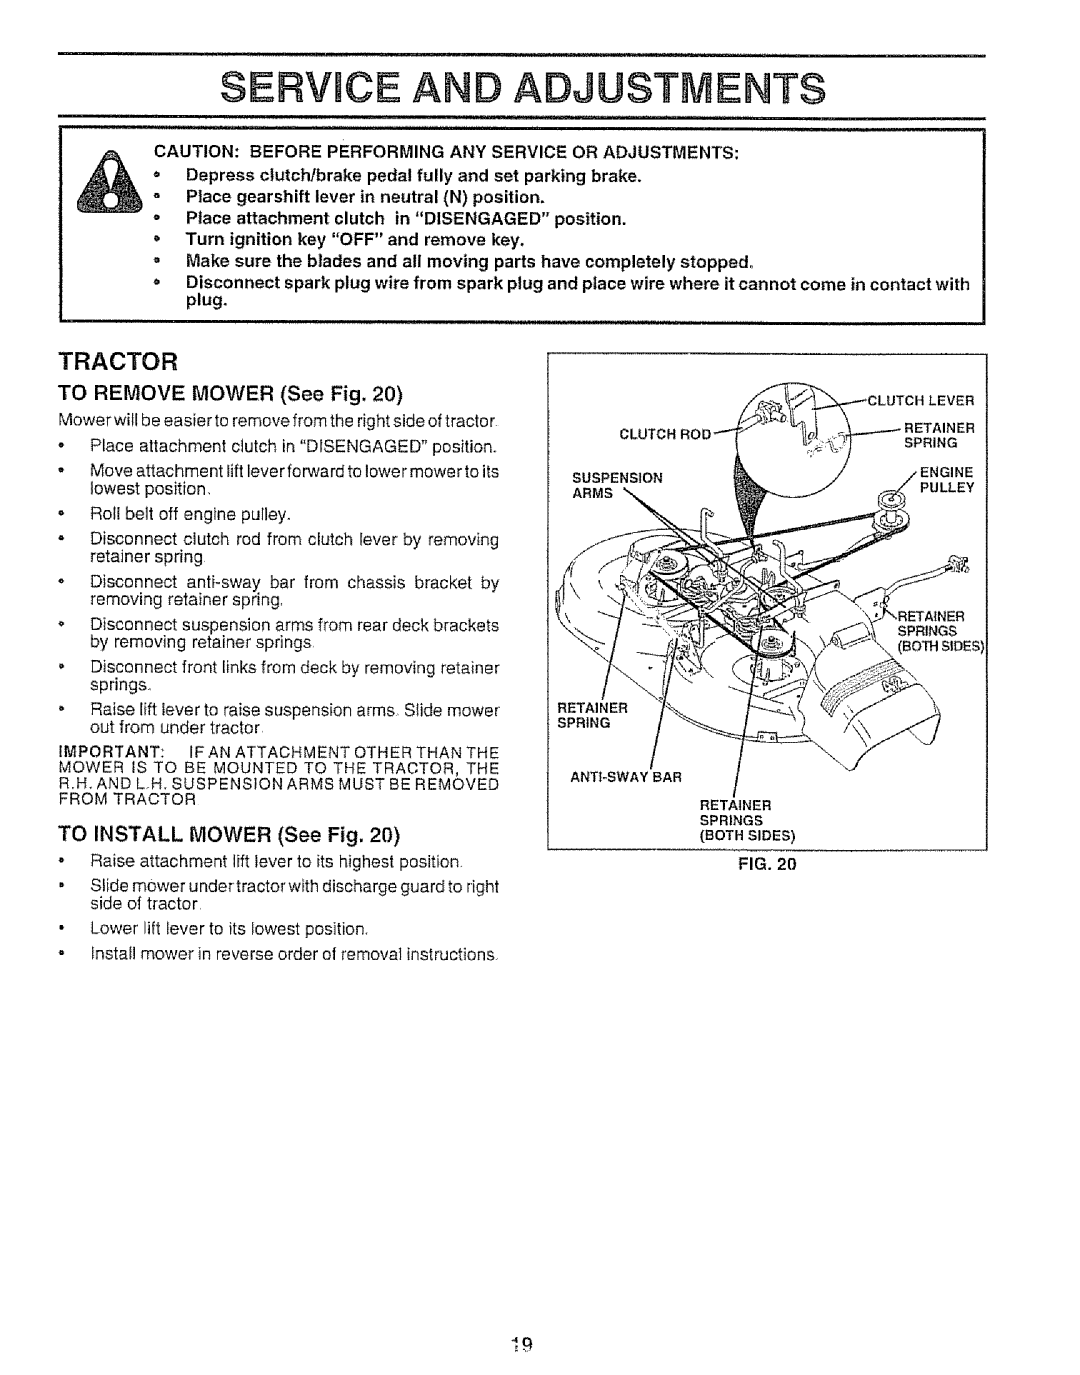 Sears 917.257651 owner manual Service An Adjustments, TO REMOVE MOWER See Fig, TO INSTALL MOWER See Fig, Tractor 